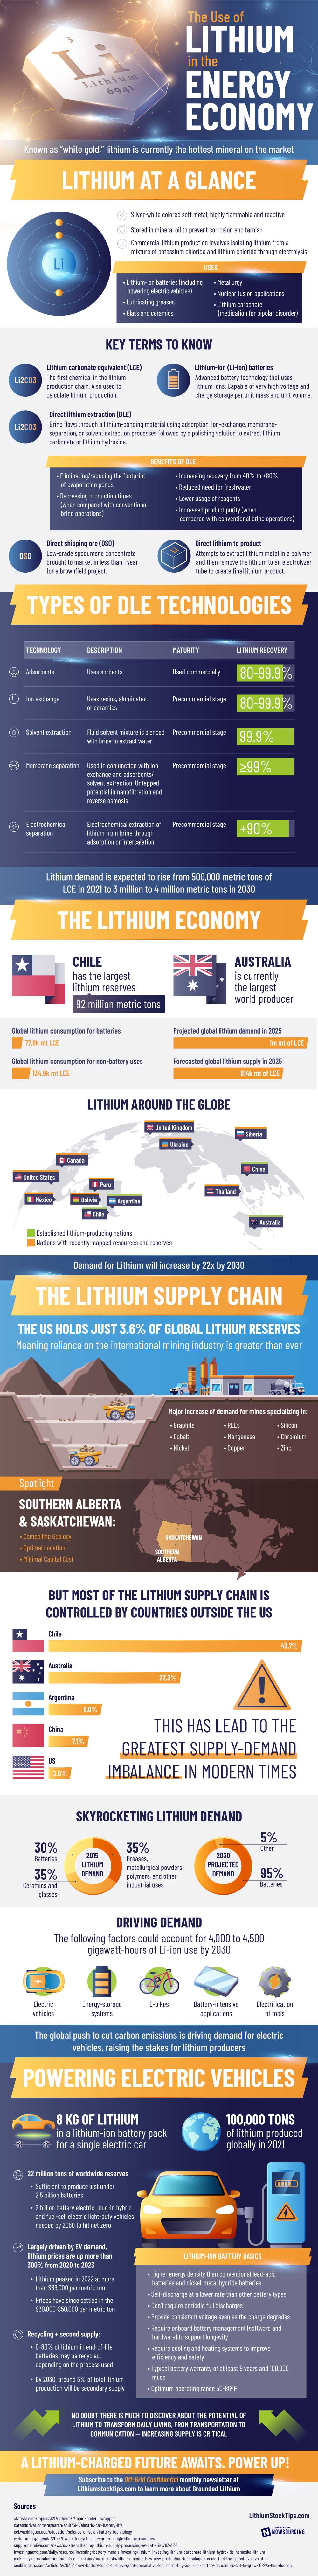 A Look at the Lithium Economy